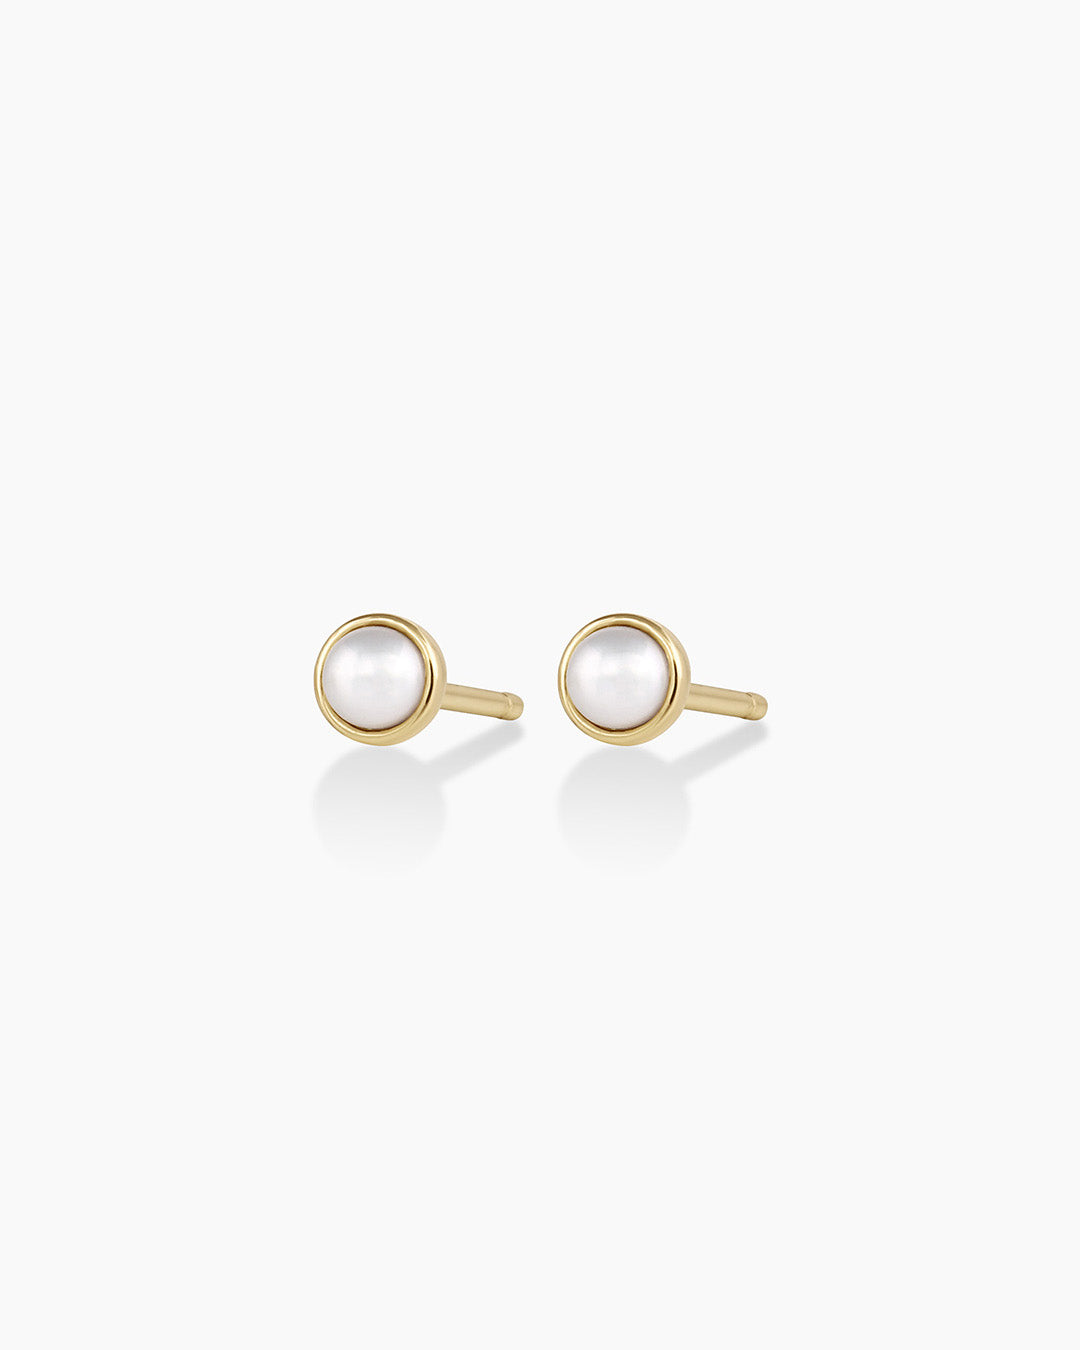 Classic Pearl Studs || option::14k Solid Gold, Pearl - June, Pair